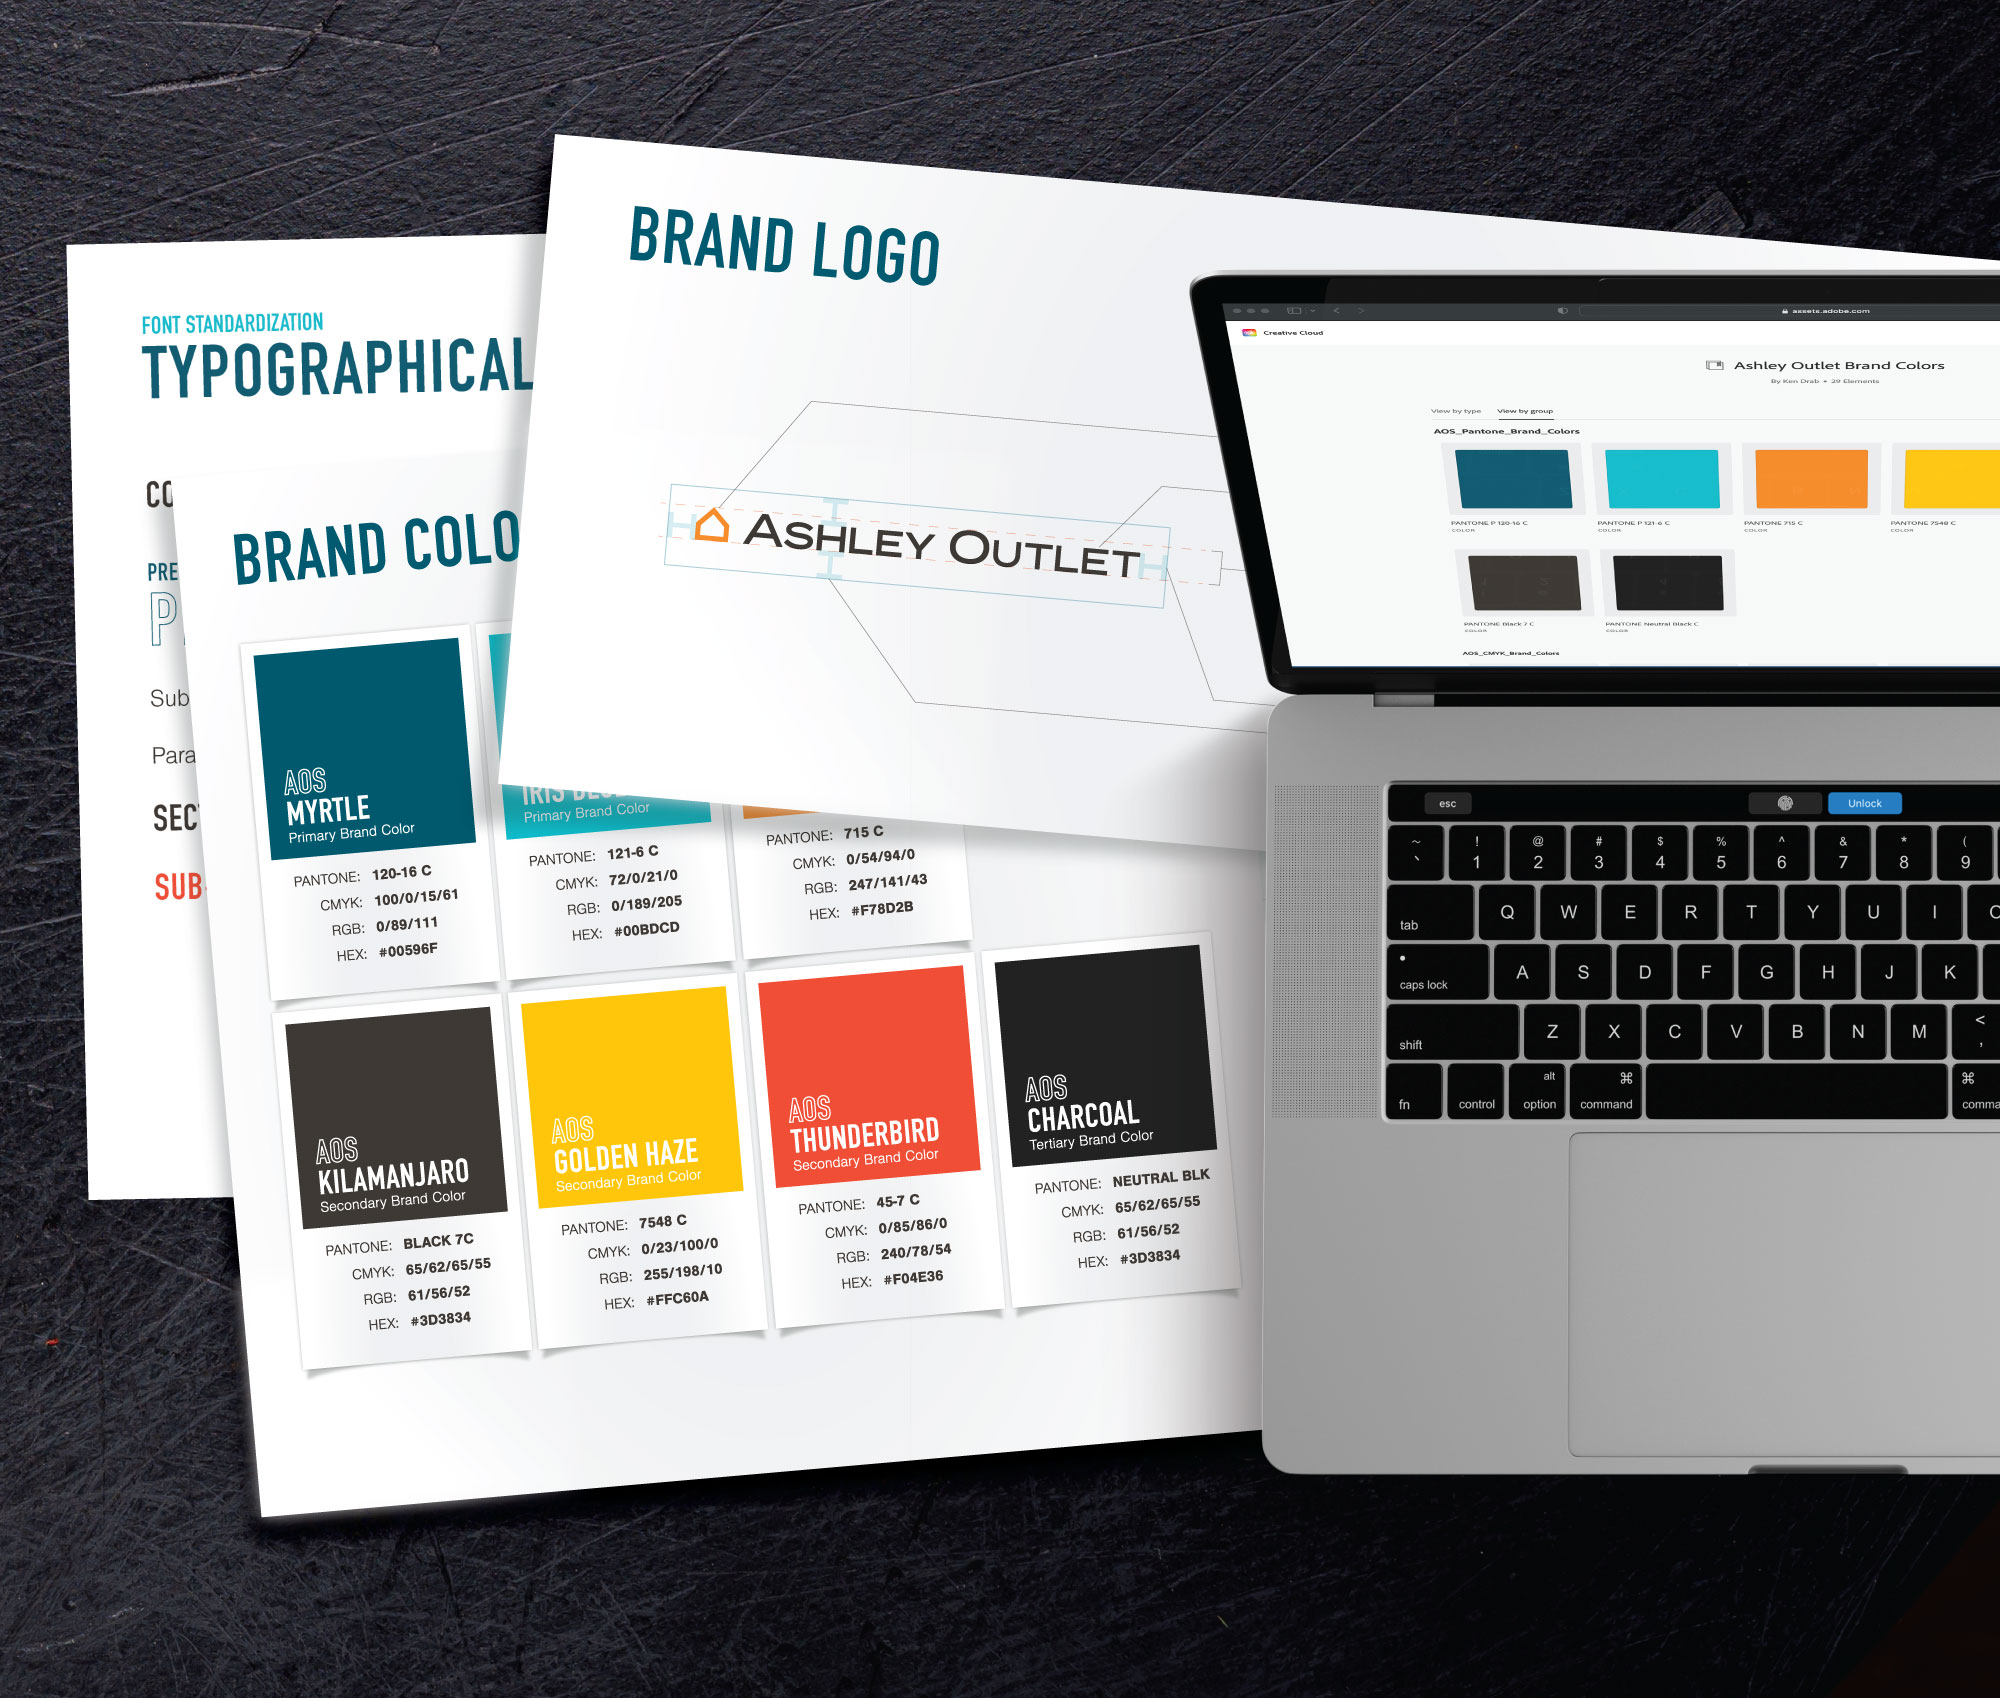 Ashley Outlet Design System and Creative Style Guide